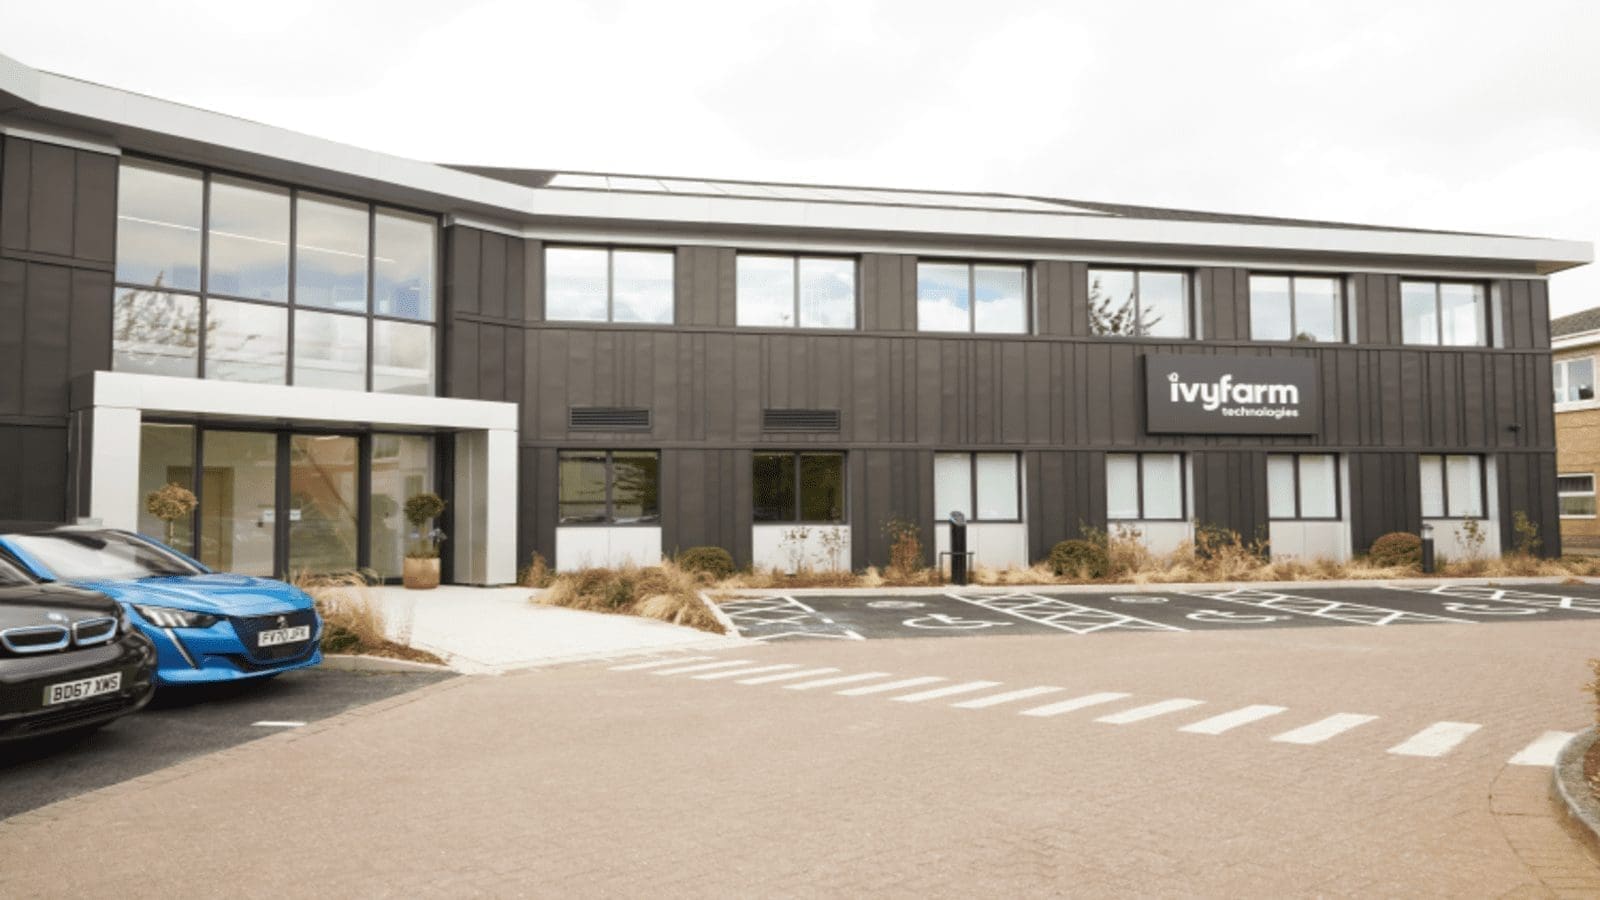 Ivy Farm Technologies inaugurates Europe’s largest cultivated meat plant to expand its R&D capabilities